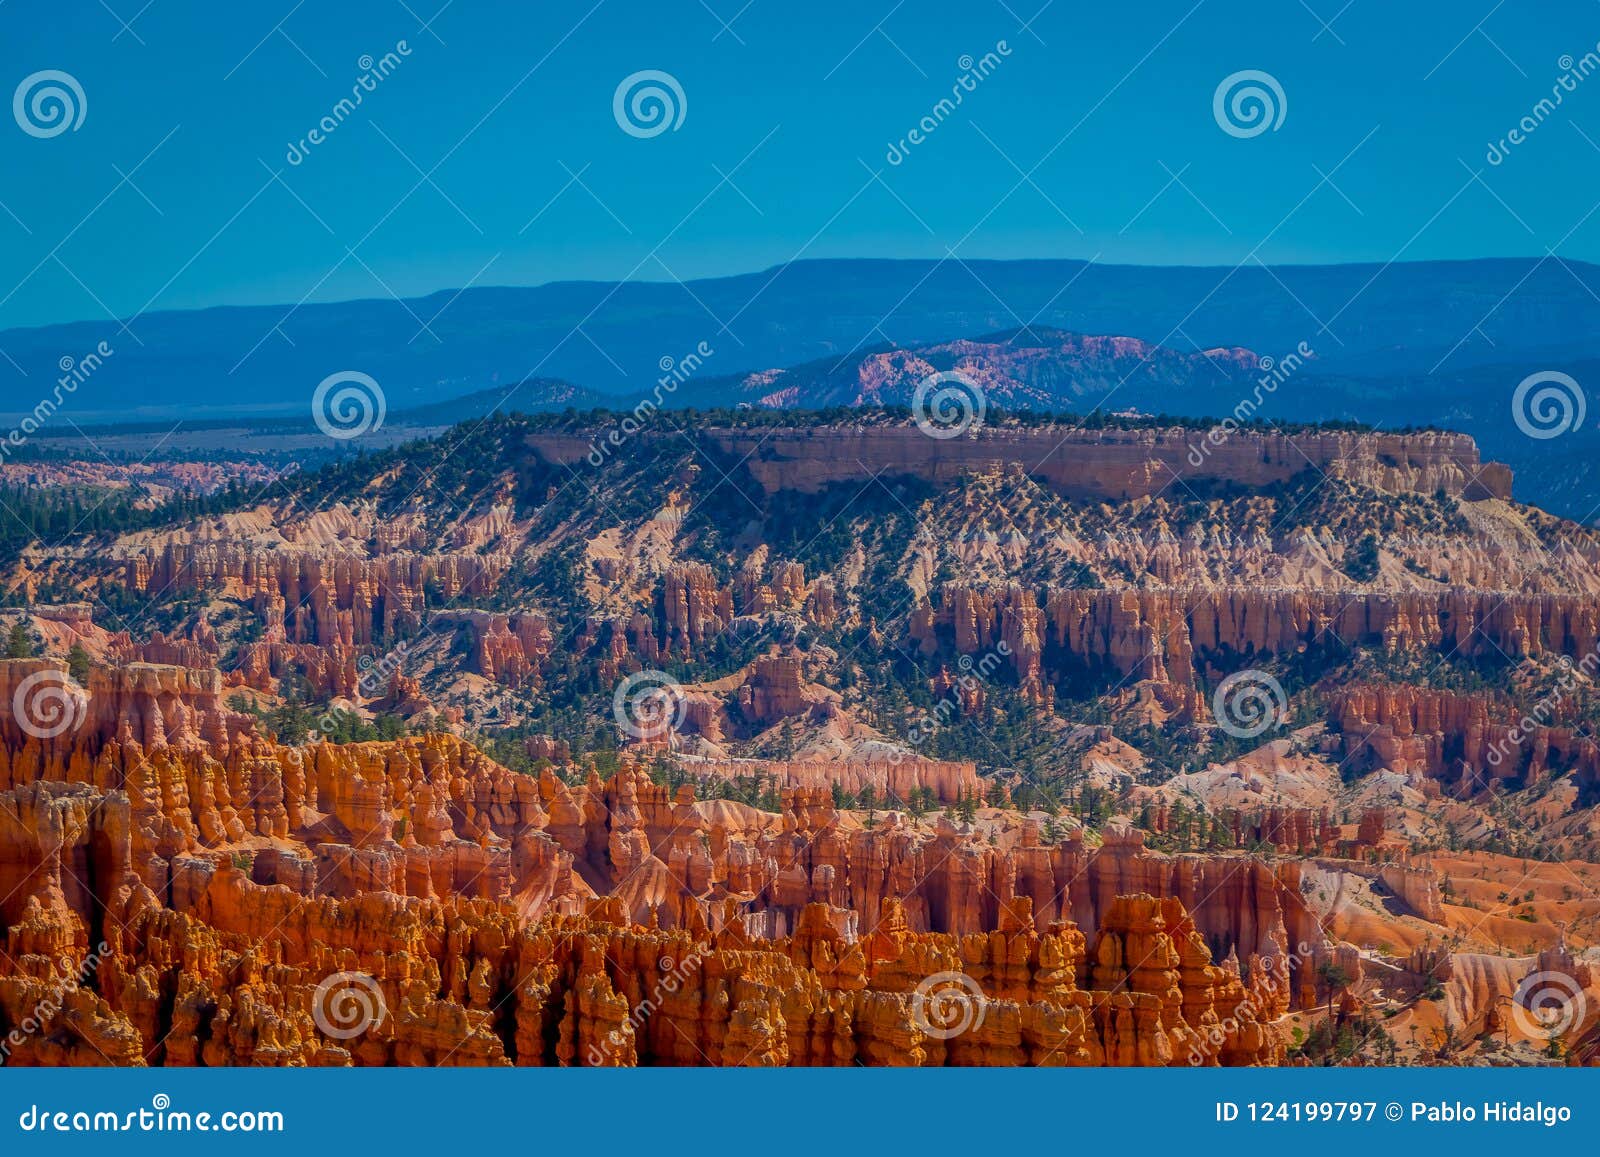 beautiful outdoor view of hoodoo landscape of bryce canyon national park